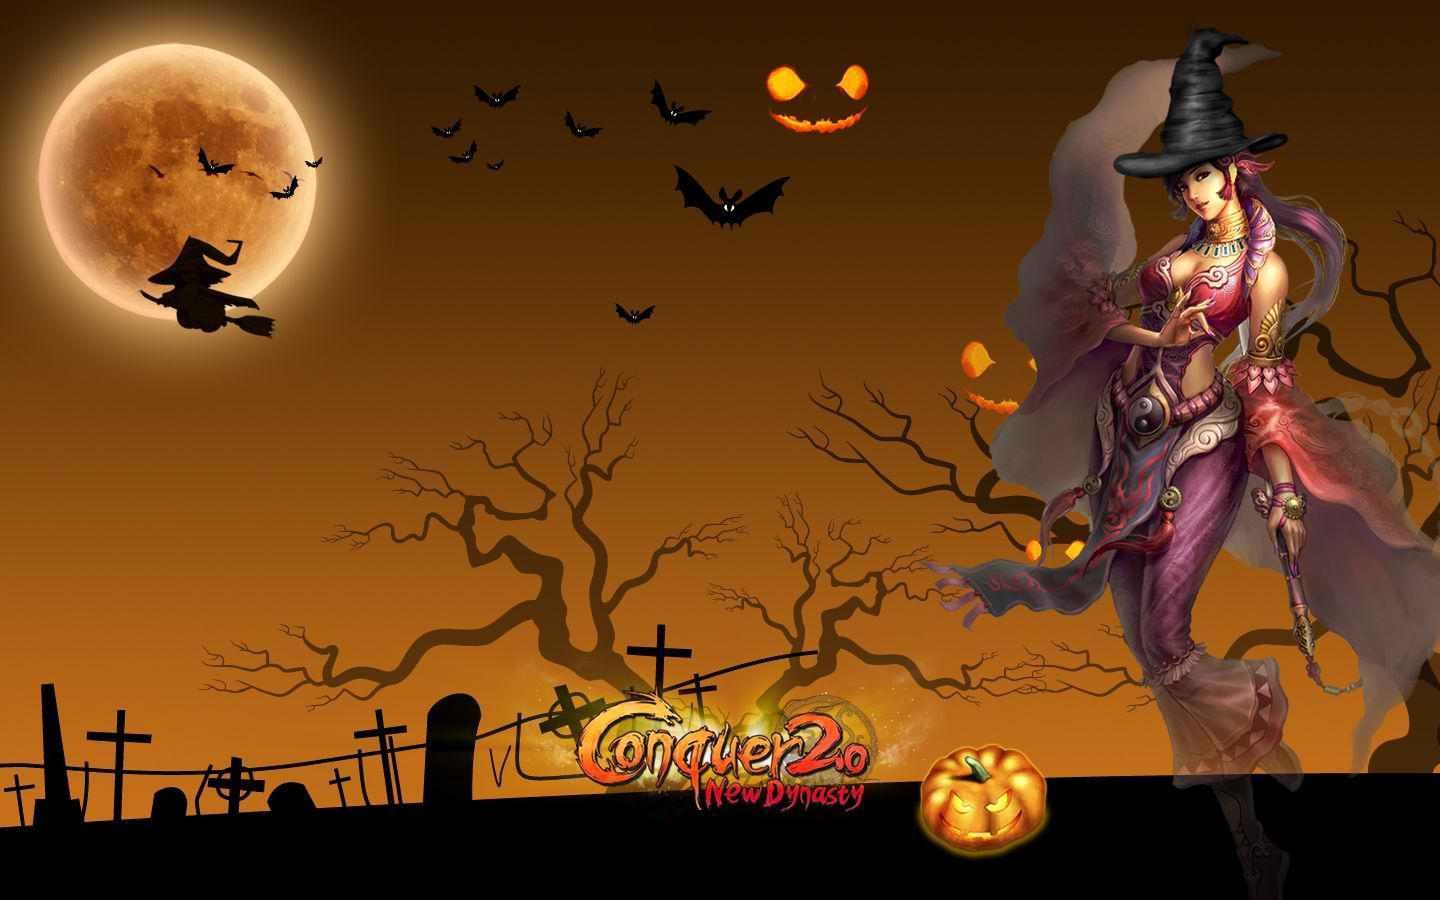 Halloween Witches Wallpaper